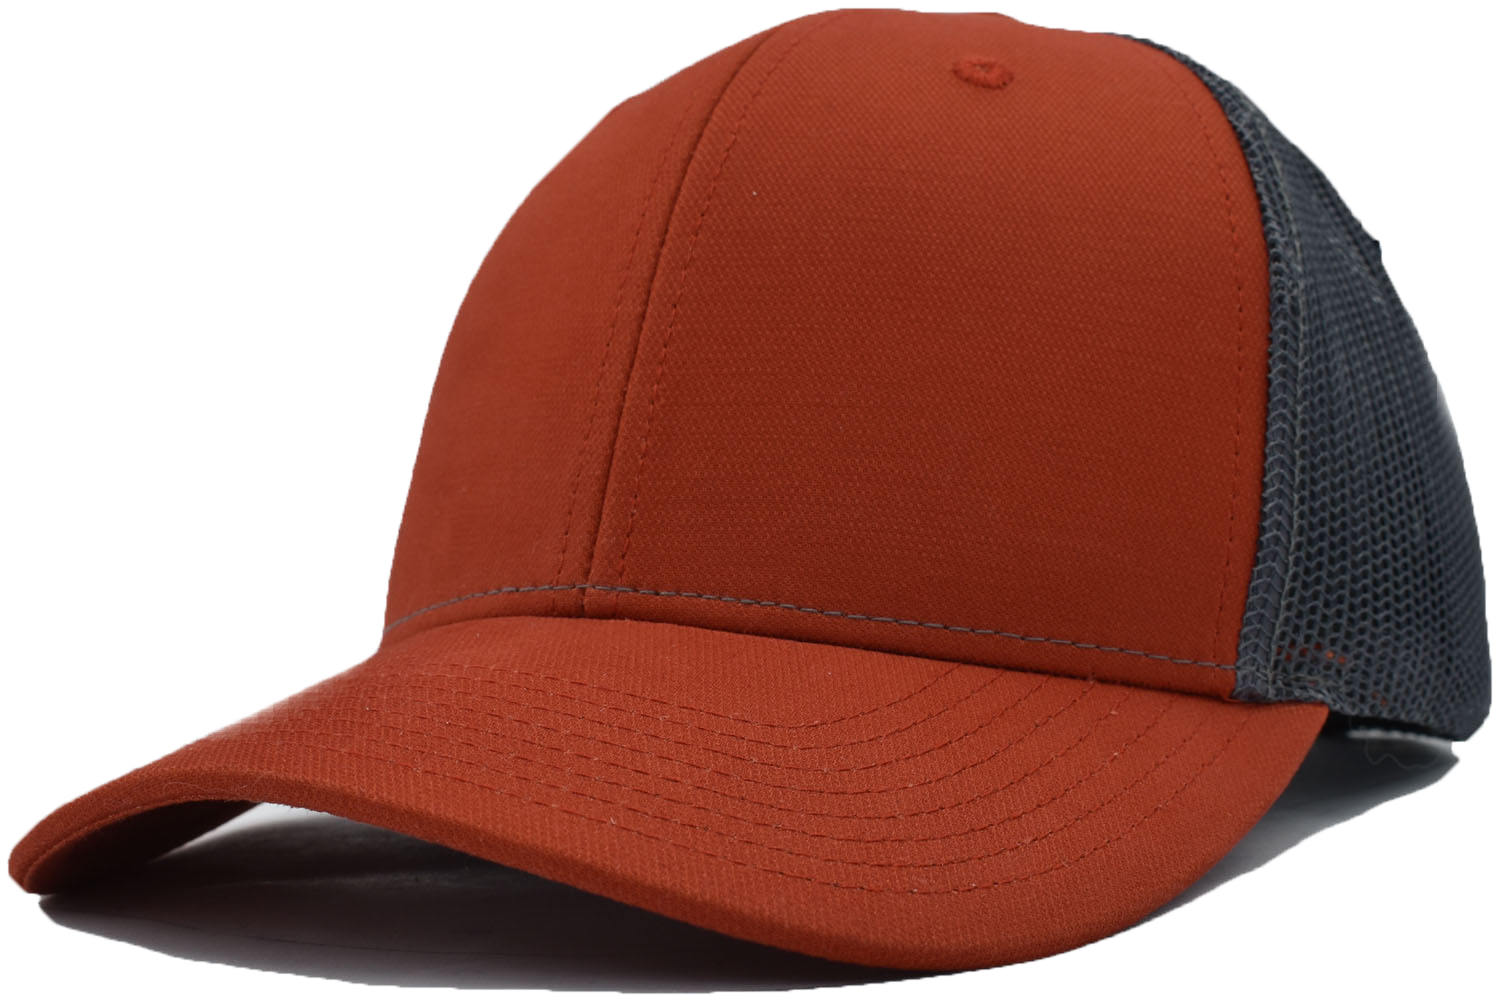 210 PRO STYLE TRUCKER / CONTRASTING STITCHING /MESH BACK